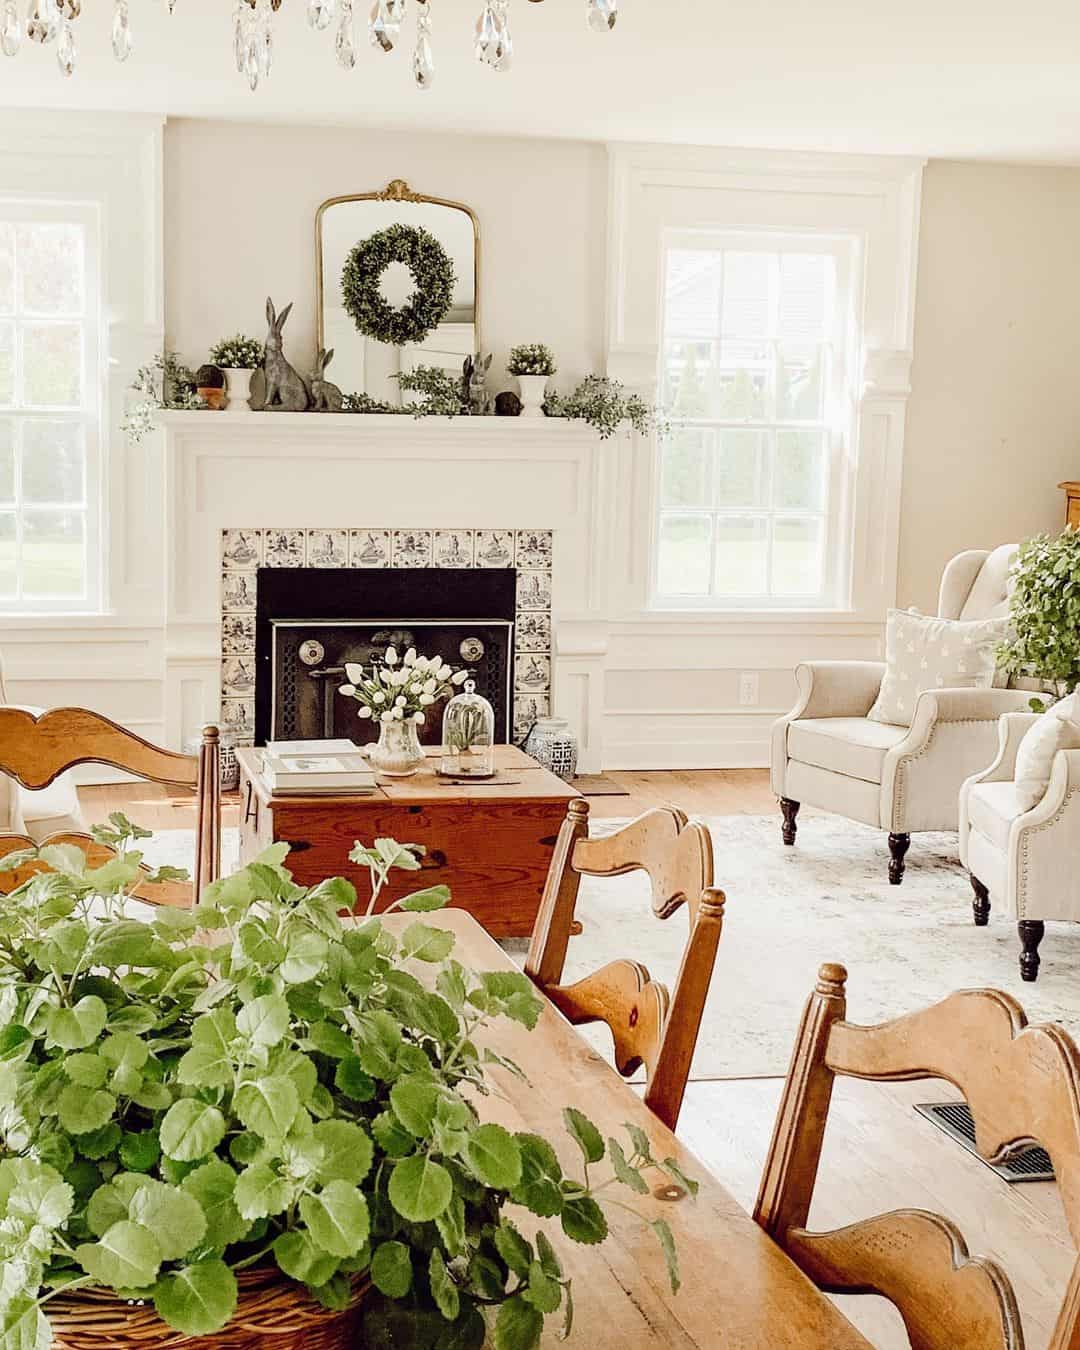 Mirror above fireplace ideas; Get ready to add a dash of style and Easter festive cheer to your fireplace! With a mirror above the mantel, you have the perfect canvas for everyday and holiday styling. But wait, there's more! Imagine a beautiful foliage wreath, hanging gracefully on the mirror, creating a captivating focal point that instantly brings the holiday spirit into your home. With this charming setup, your fireplace becomes a showstopper, a conversation starter, and a place where cherished memories are made.